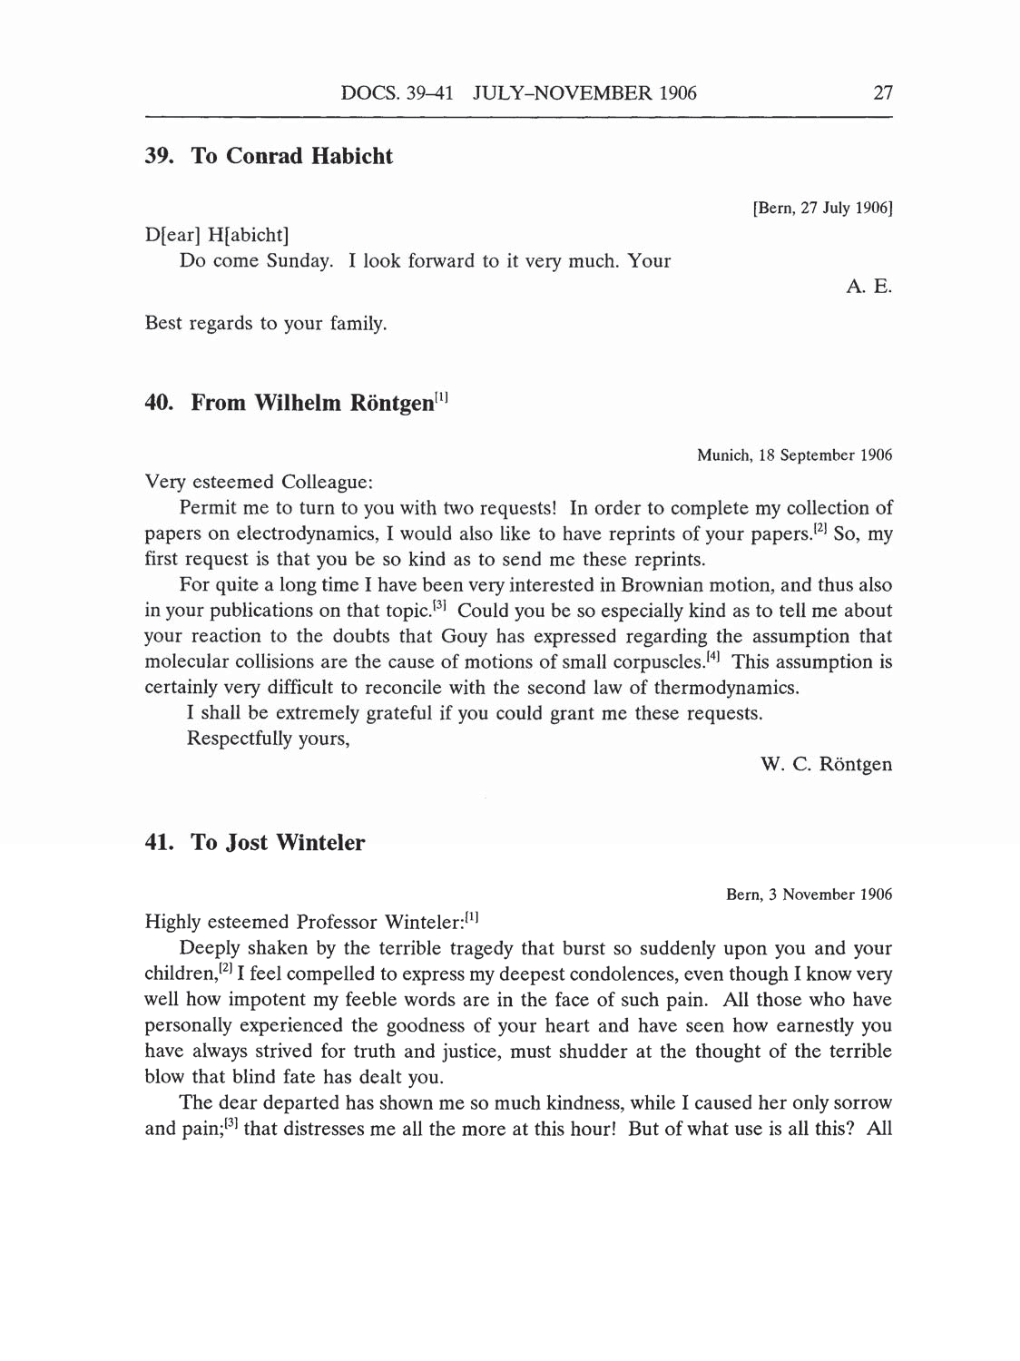 Volume 5: The Swiss Years: Correspondence, 1902-1914 (English translation supplement) page 27